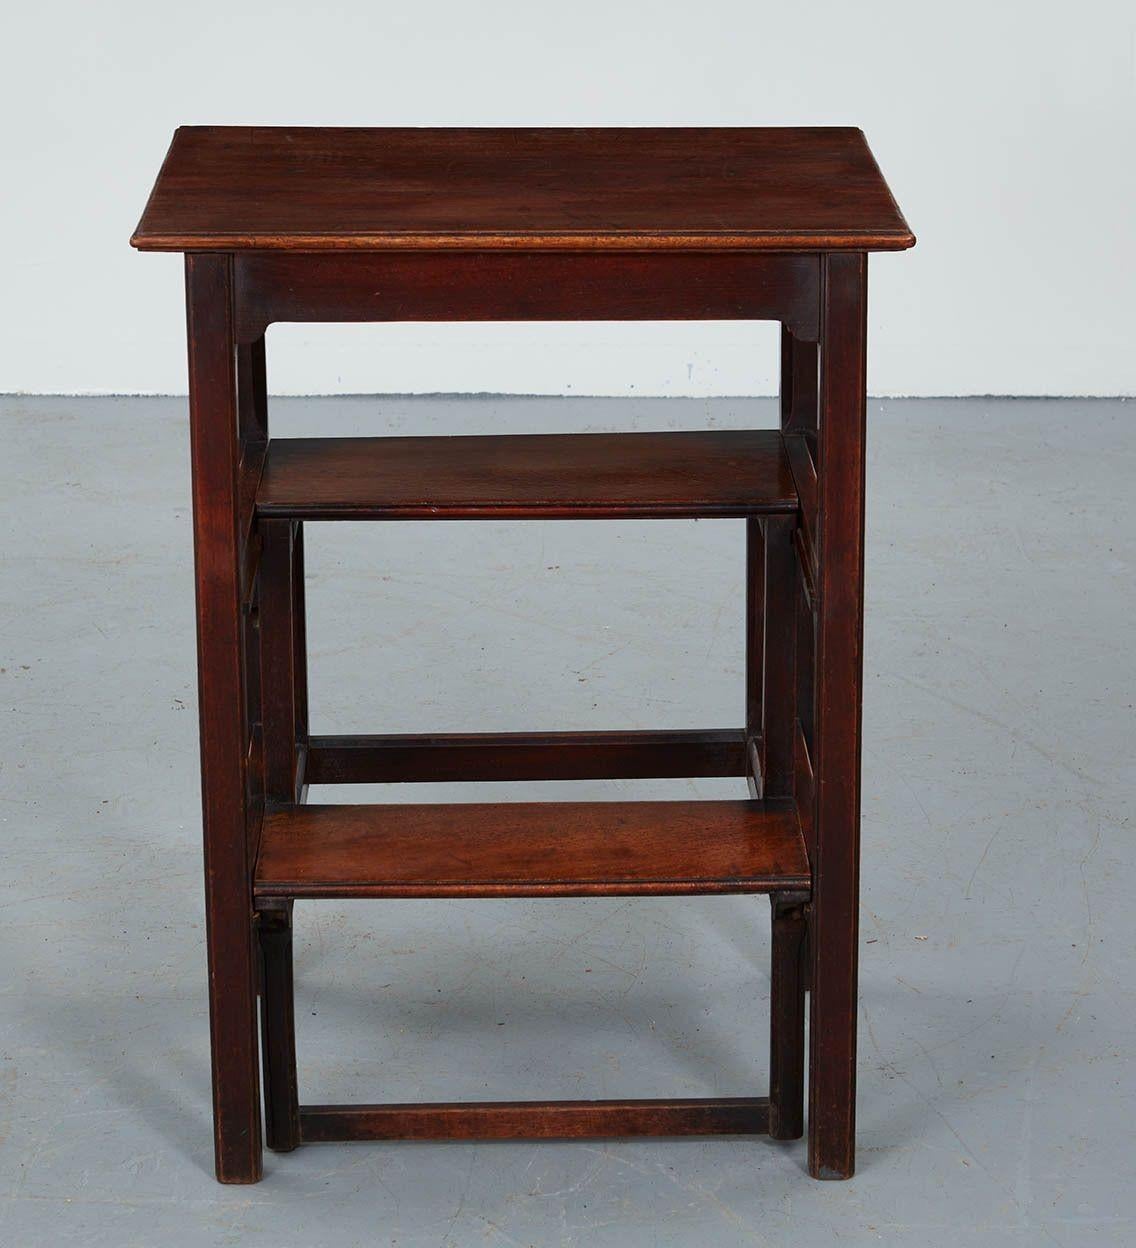 A rare 18th century English mahogany metamorphic table with integral fold away step ladder. Fine quality construction and superb timber. Beaded edges and chamfered stretchers with molded edge to top. Delicate, elegant appearance but functionally